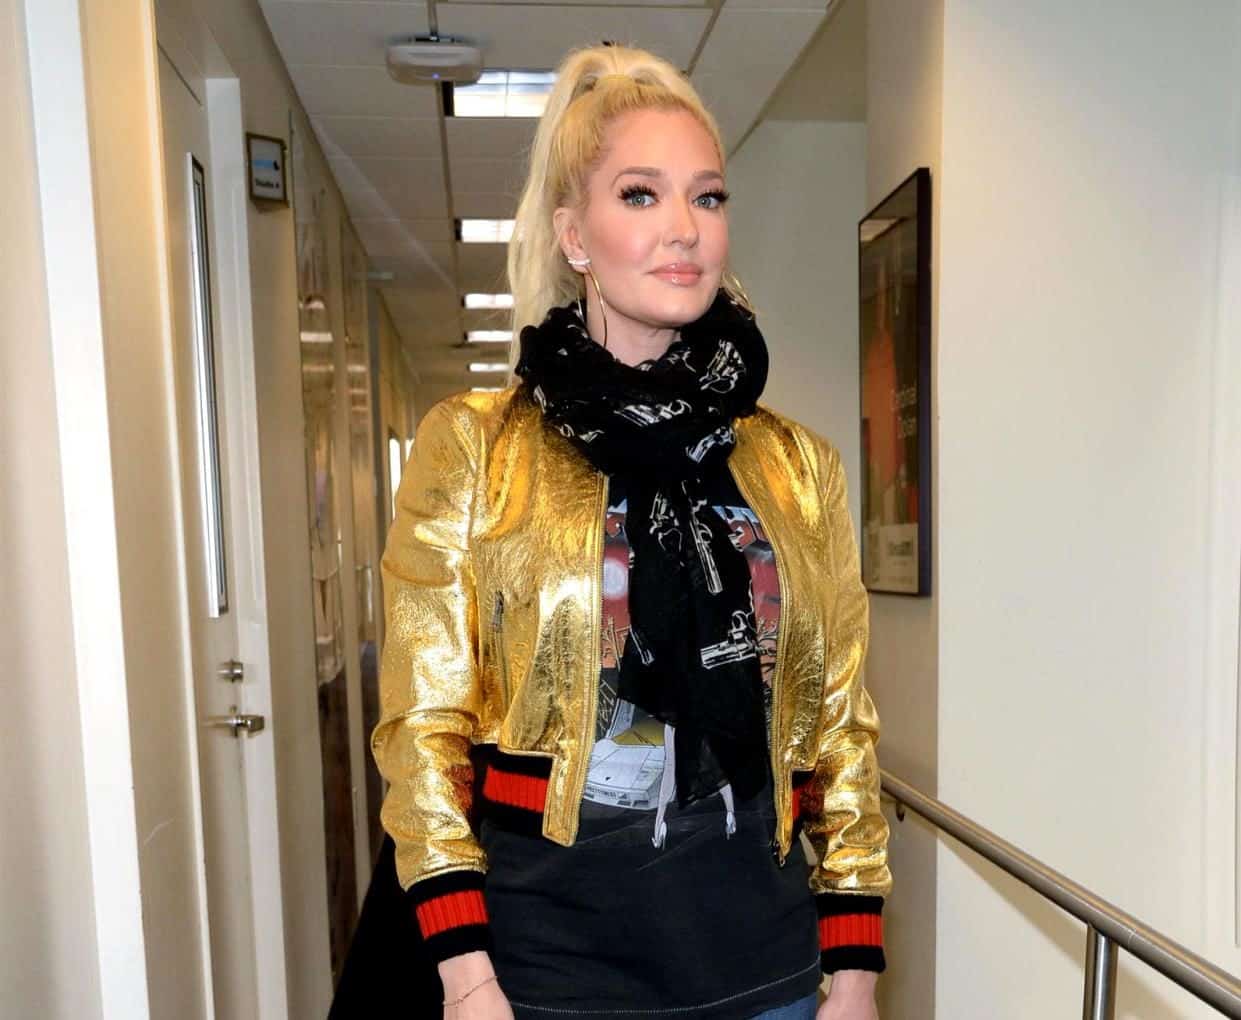 RHOBH's Erika Jayne Will "Fight to Defend" Herself After Filing Appeal Against Judge's Ruling on $750k Earrings, Hopes to Keep Benefits From Tom